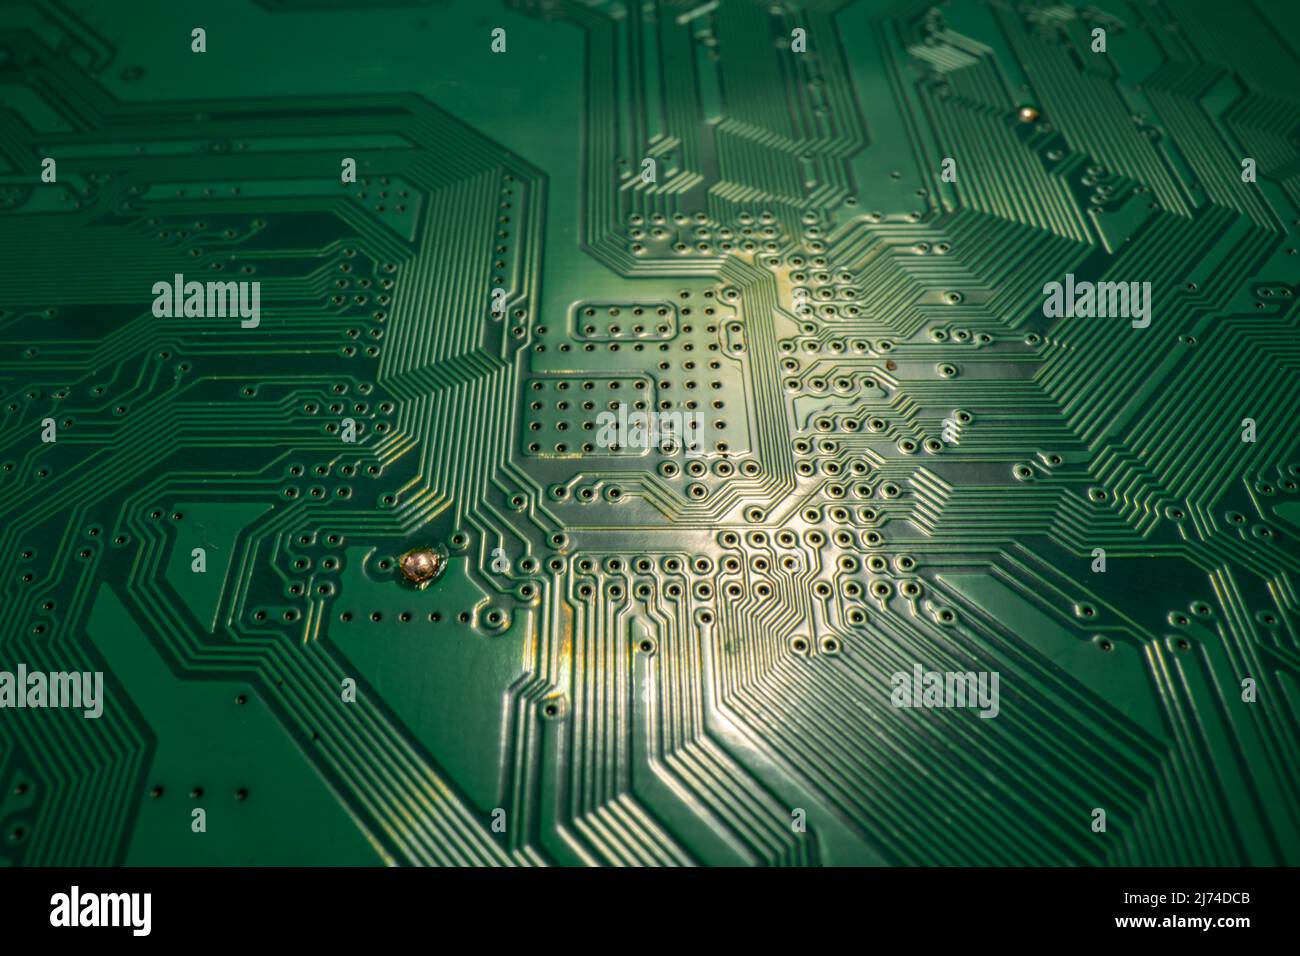 Circuit board. Technological electronic plate with roads and other components, selective focus. Technology background, electronics texture. Stock Photo